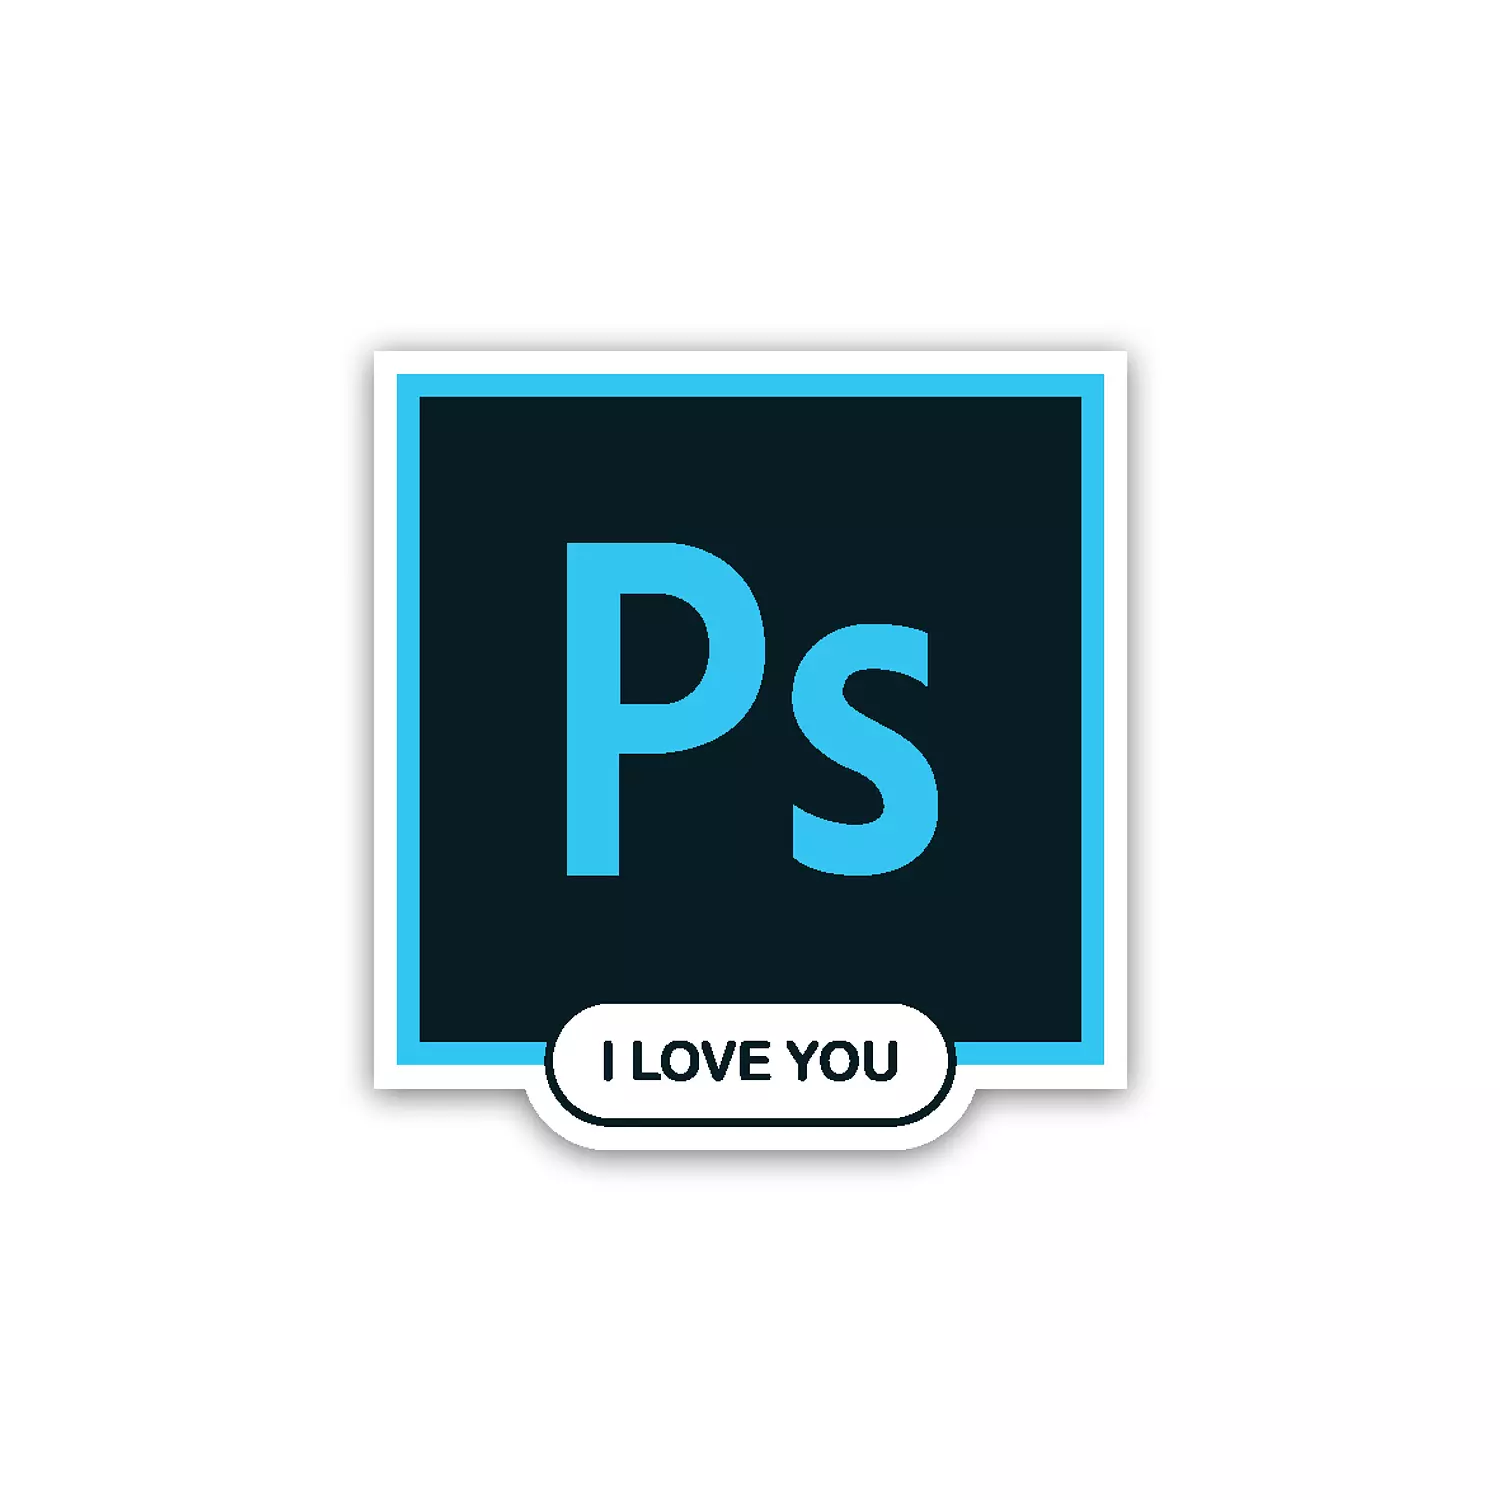 Photoshop app - I Love You  hover image